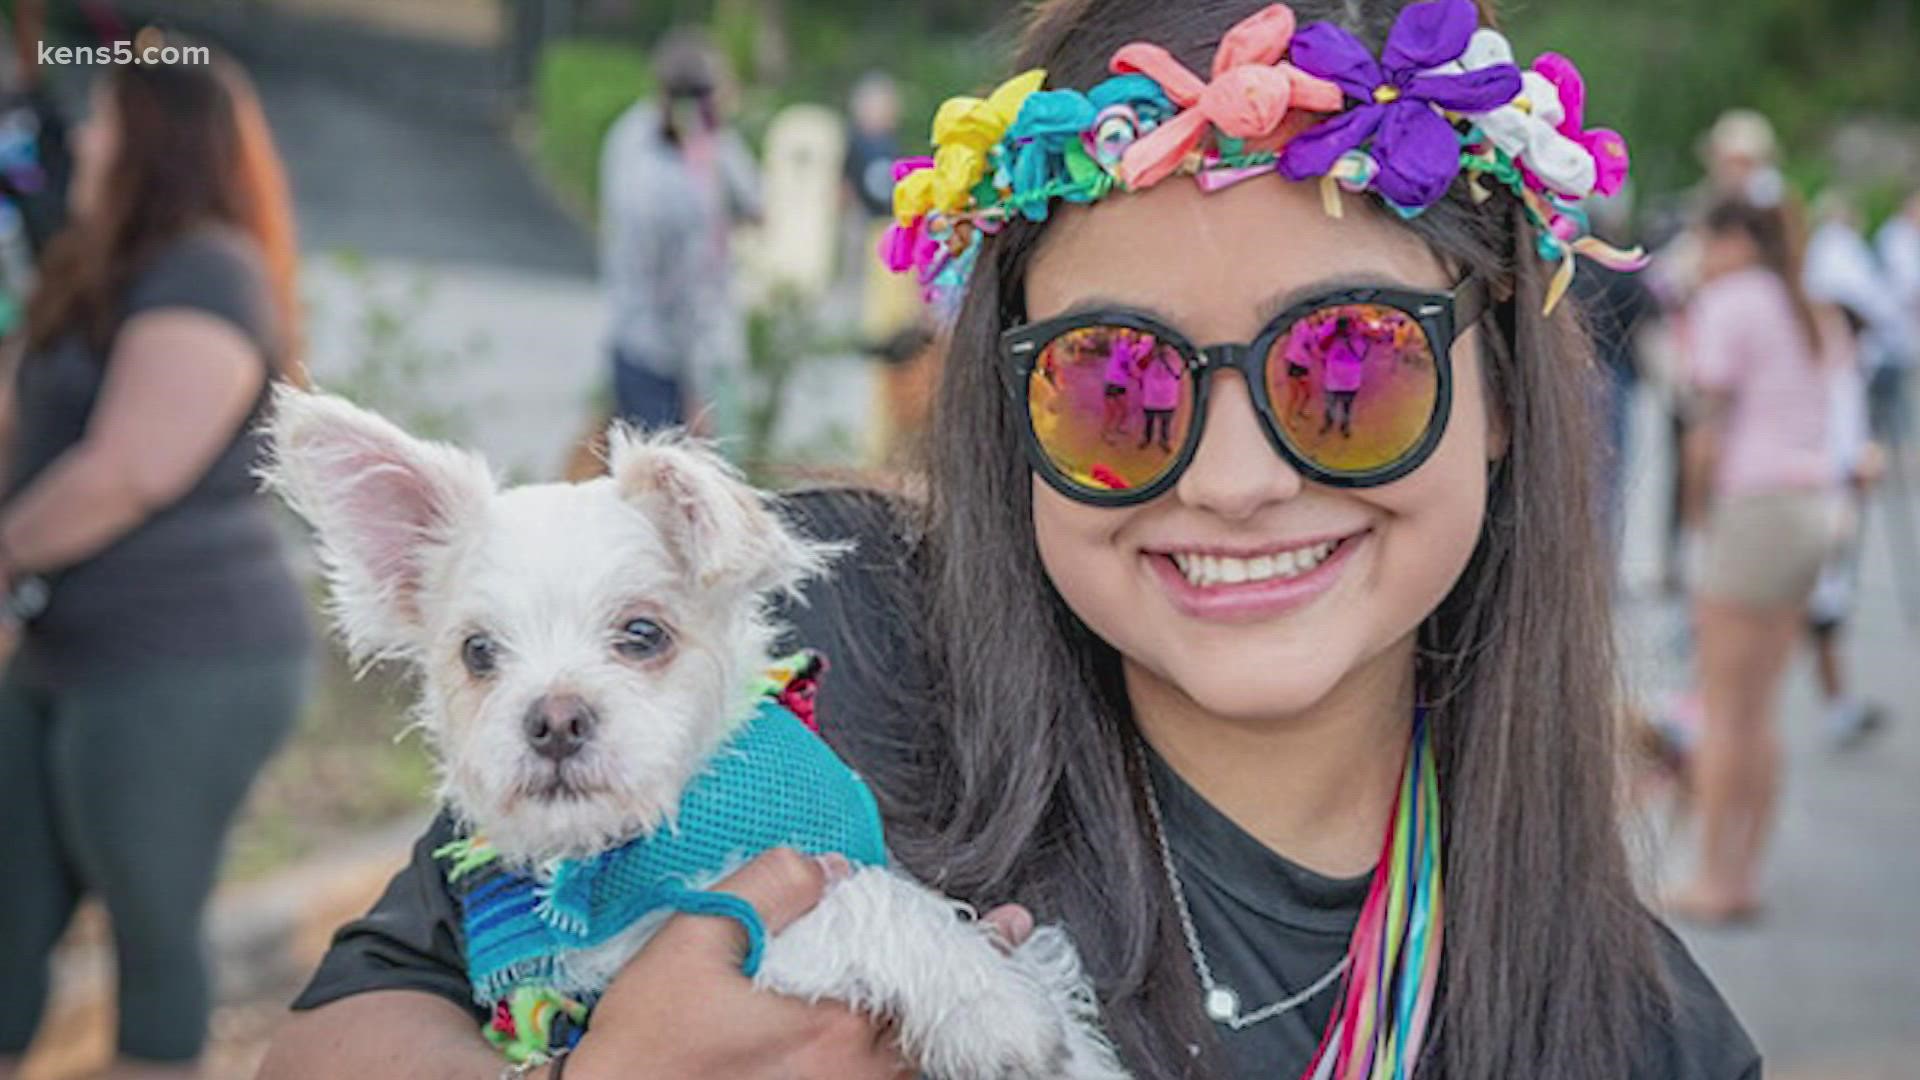 The Fiesta Pooch Parade, the Fit Fest and so much more is still happening!